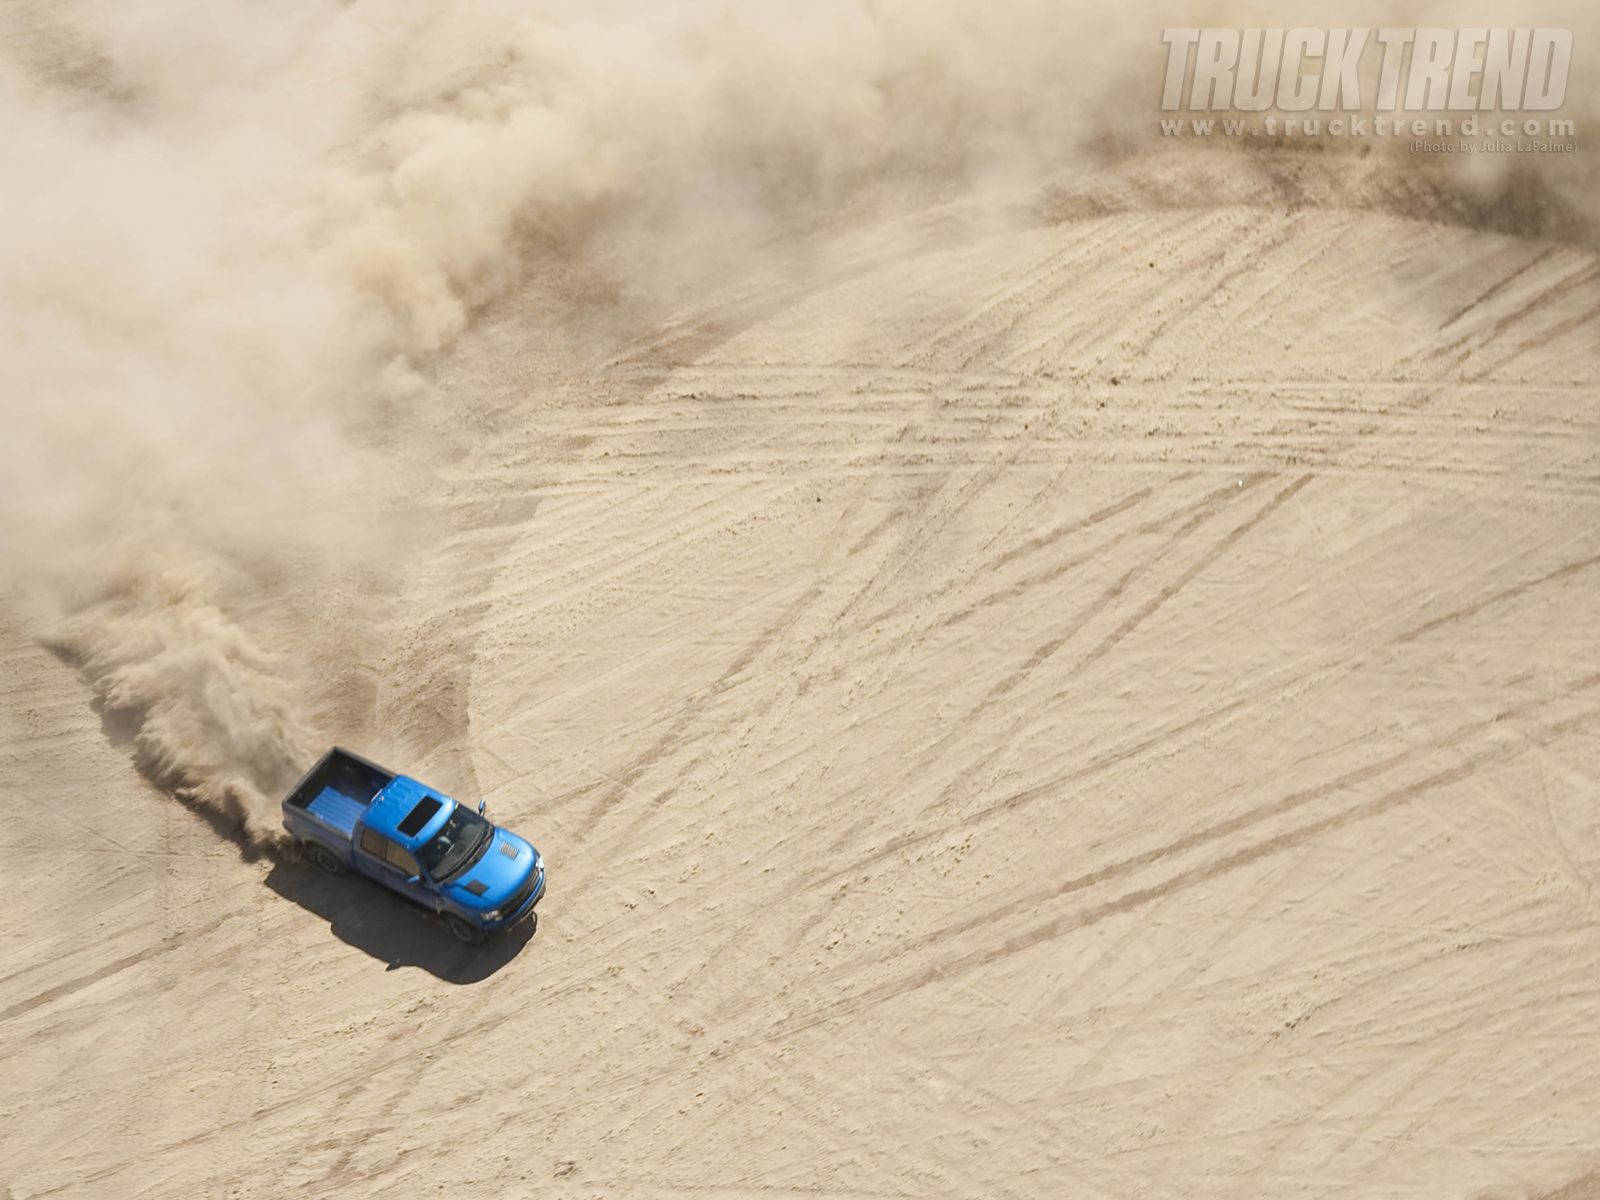 Power And Performance: The Ford Raptor In Drift Background